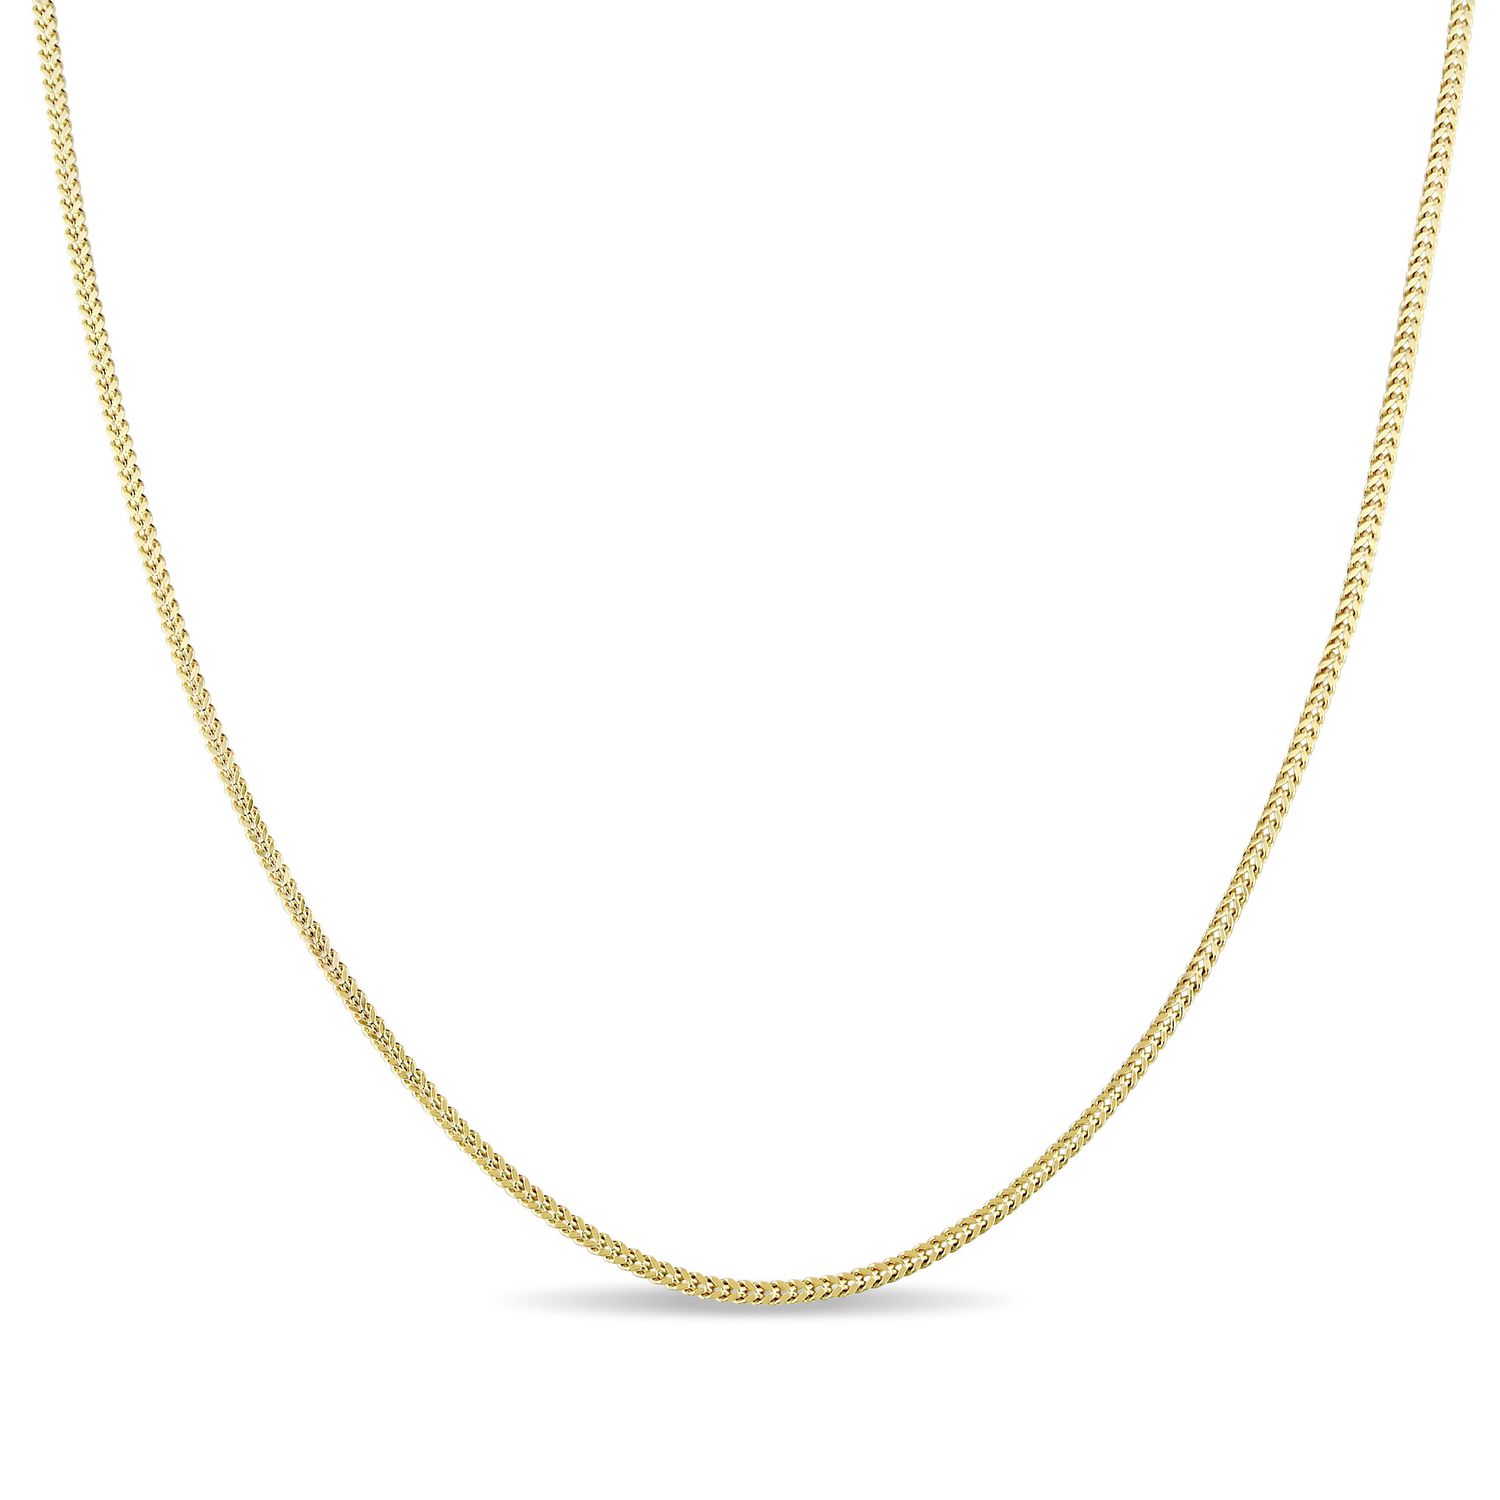 Asteria Men's 10 K Yellow Gold Franco Link Chain Necklace, 20 ...